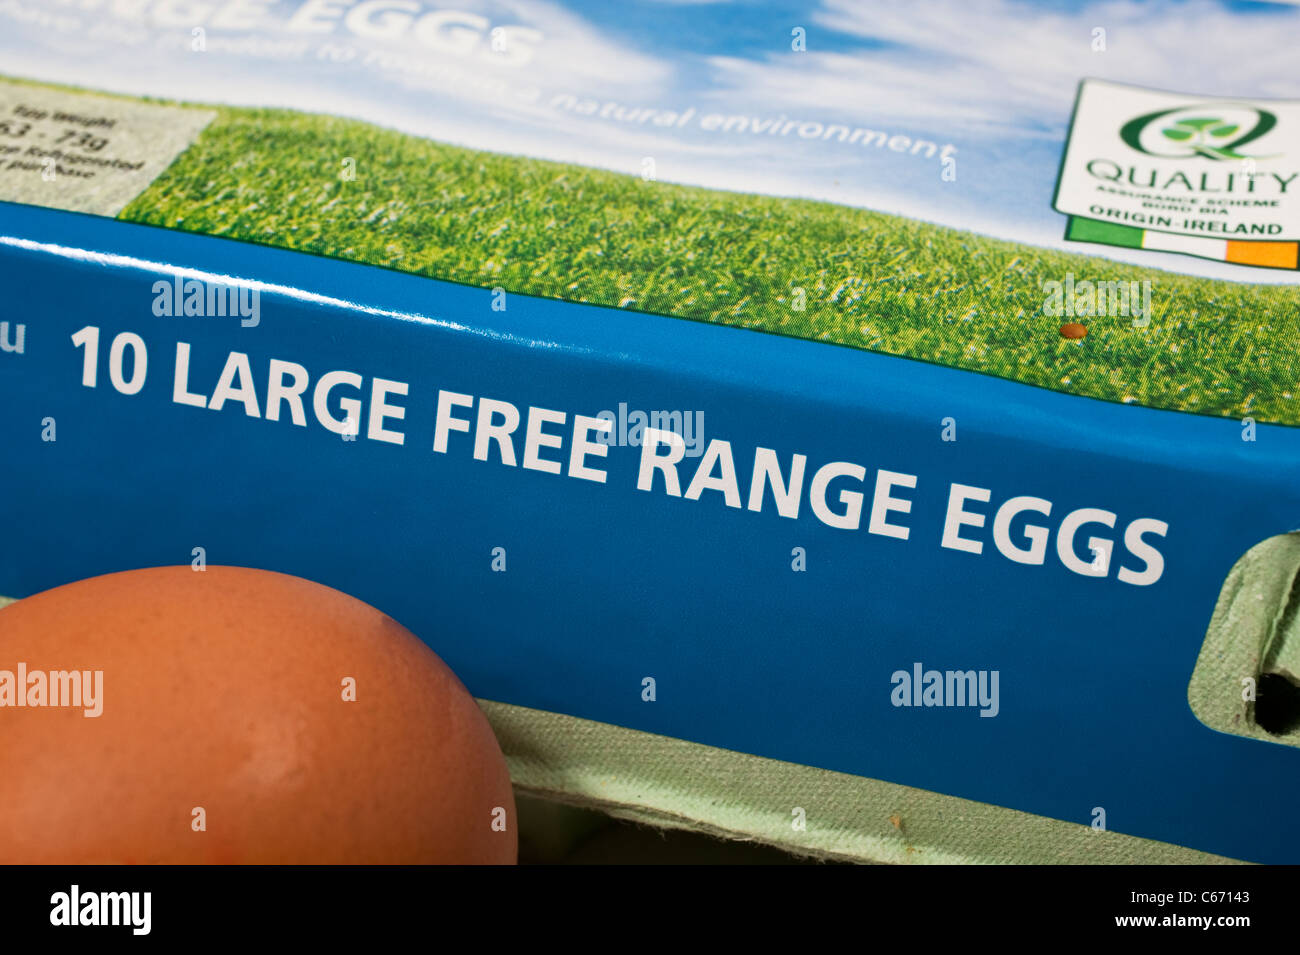 The packaging on a carton of free range hens eggs Stock Photo